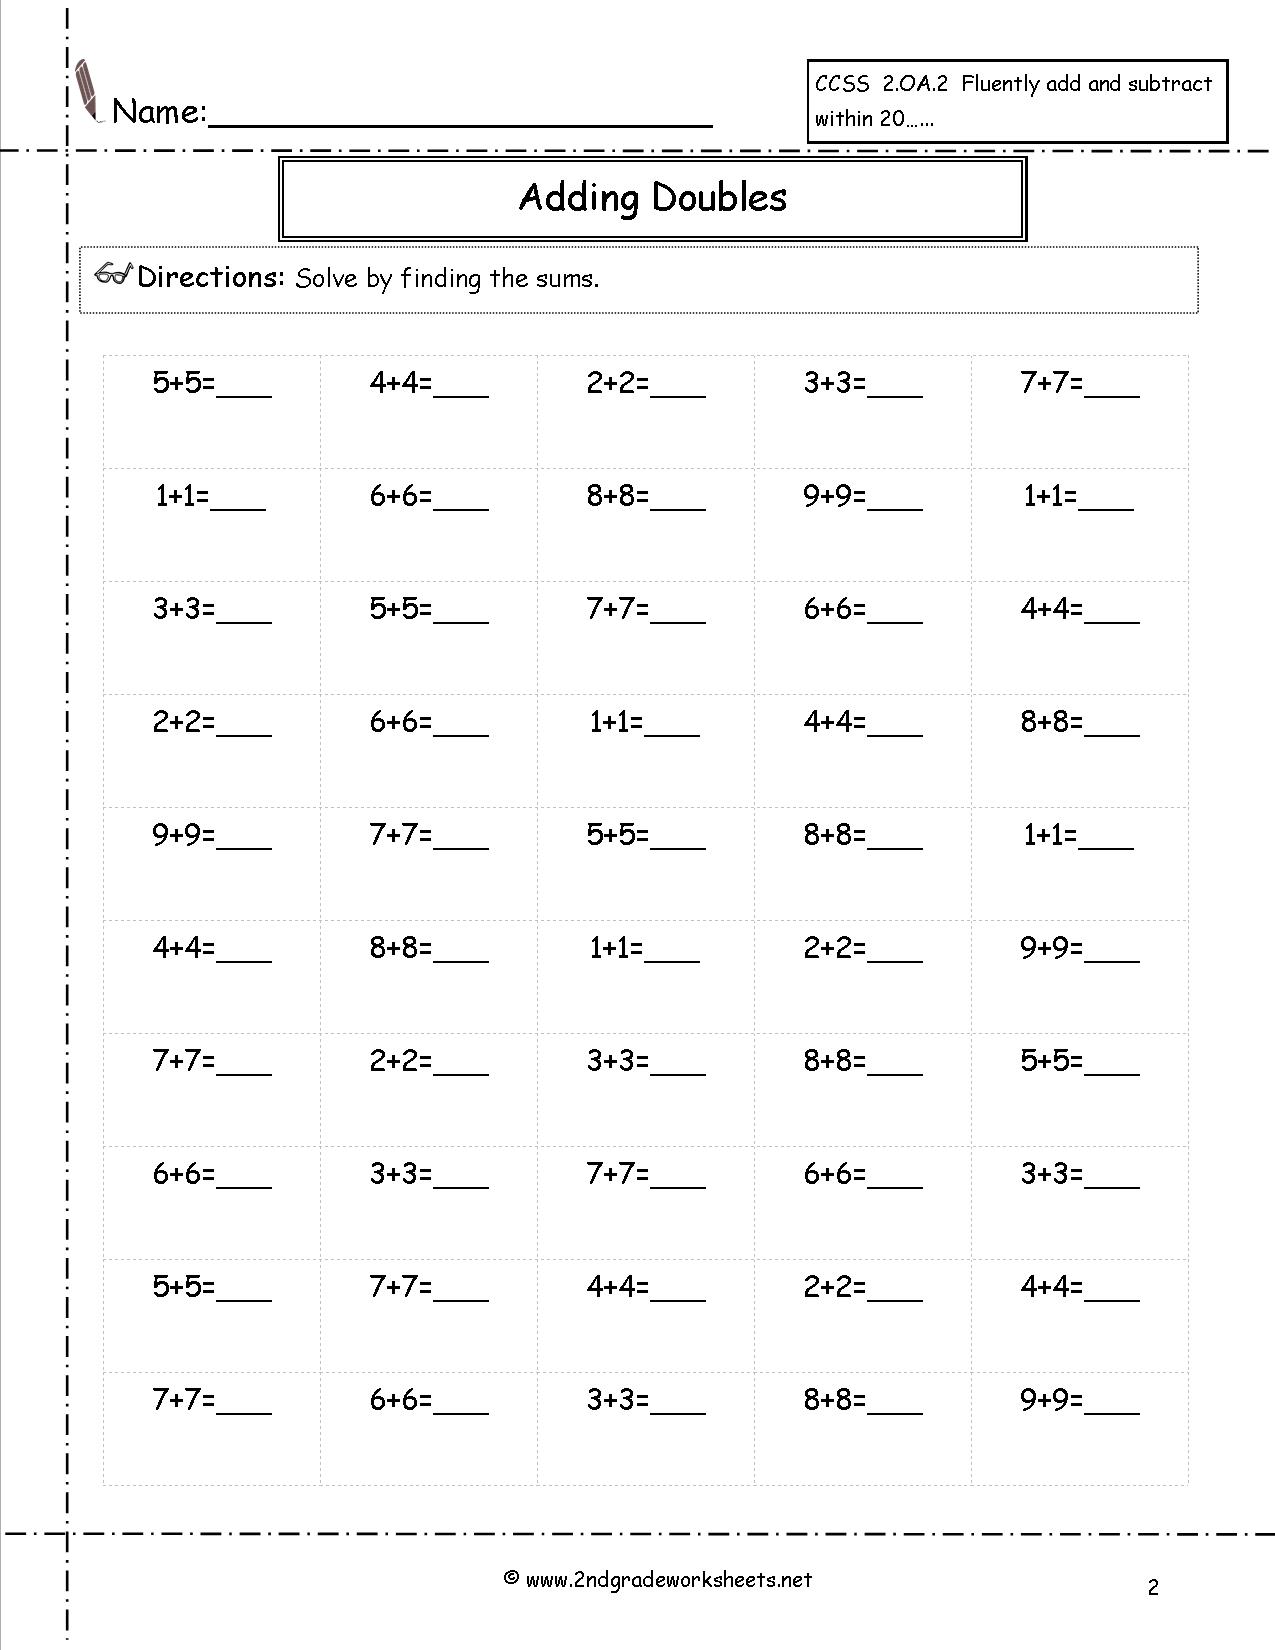 12-best-images-of-minute-math-subtraction-worksheets-2nd-grade-subtraction-worksheets-1st